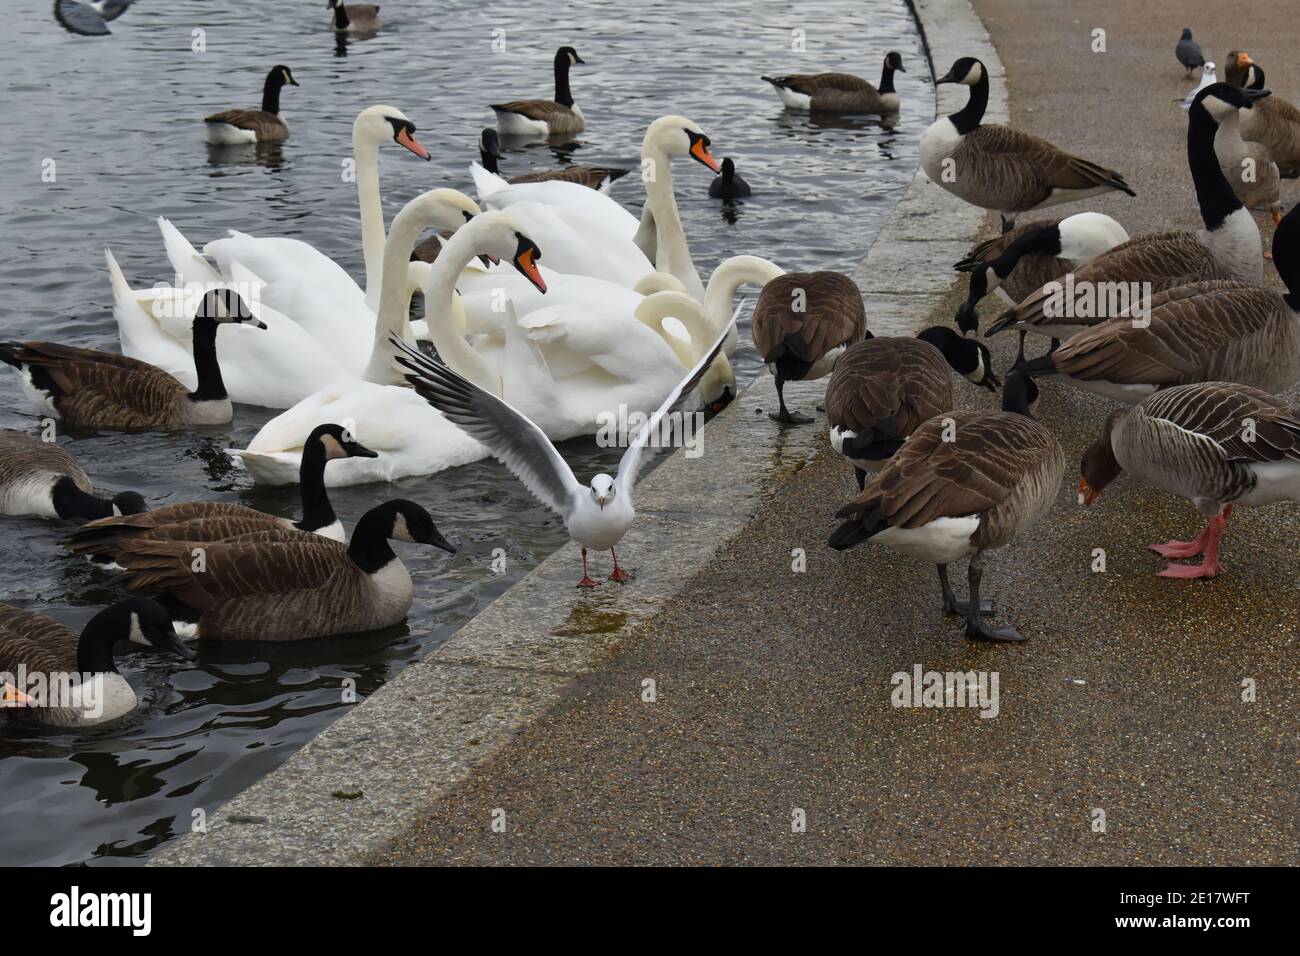 Nonbreeding black-headed gull among mute swans Canada and greylag geese in London It has dark smudging above and behind the eyes dusky-tipped red bill Stock Photo